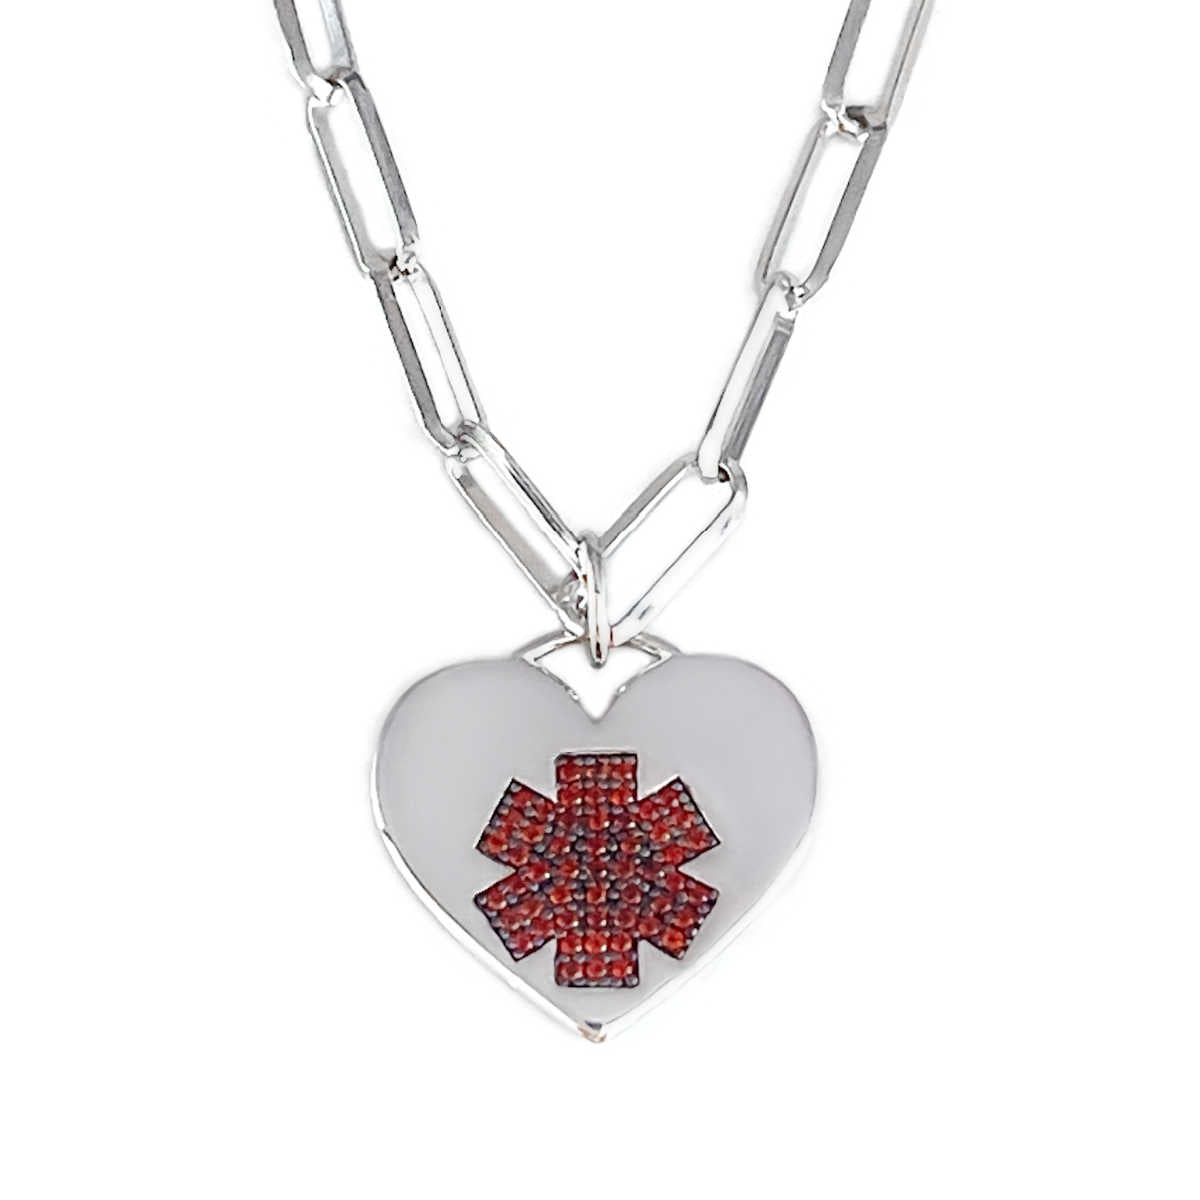 Heart Shaped Medical Alert Necklace | Sterling Silver Medical ID Necklace Charm for Women| Pretty Medical Alert Bracelets from Charmed Medical Jewelry